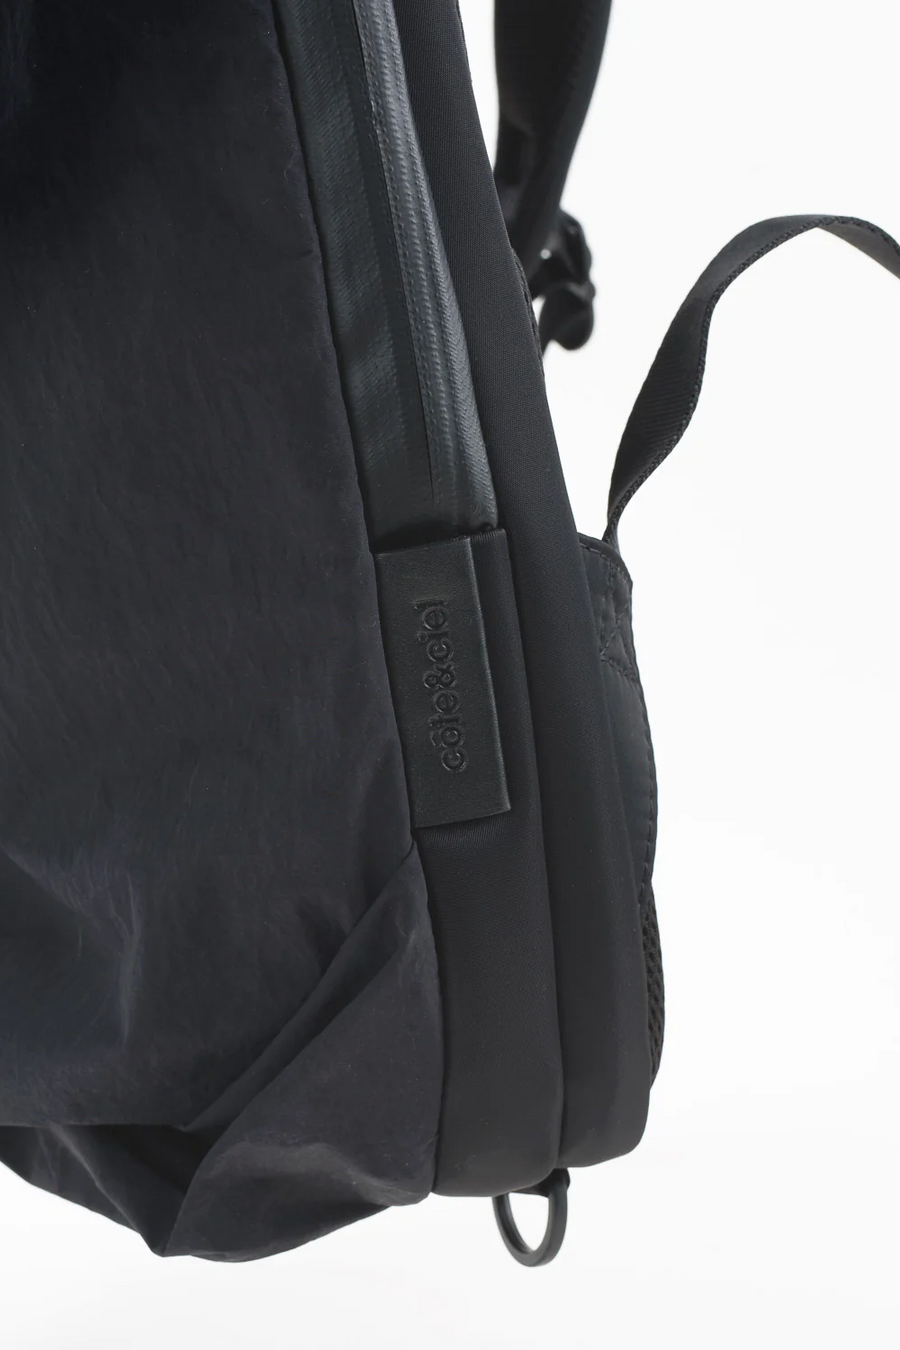 Buy the Cote & Ciel Ladon Komatsu Onibegie Nylon Backpack in Black at Intro. Spend £50 for free UK delivery. Official stockists. We ship worldwide.